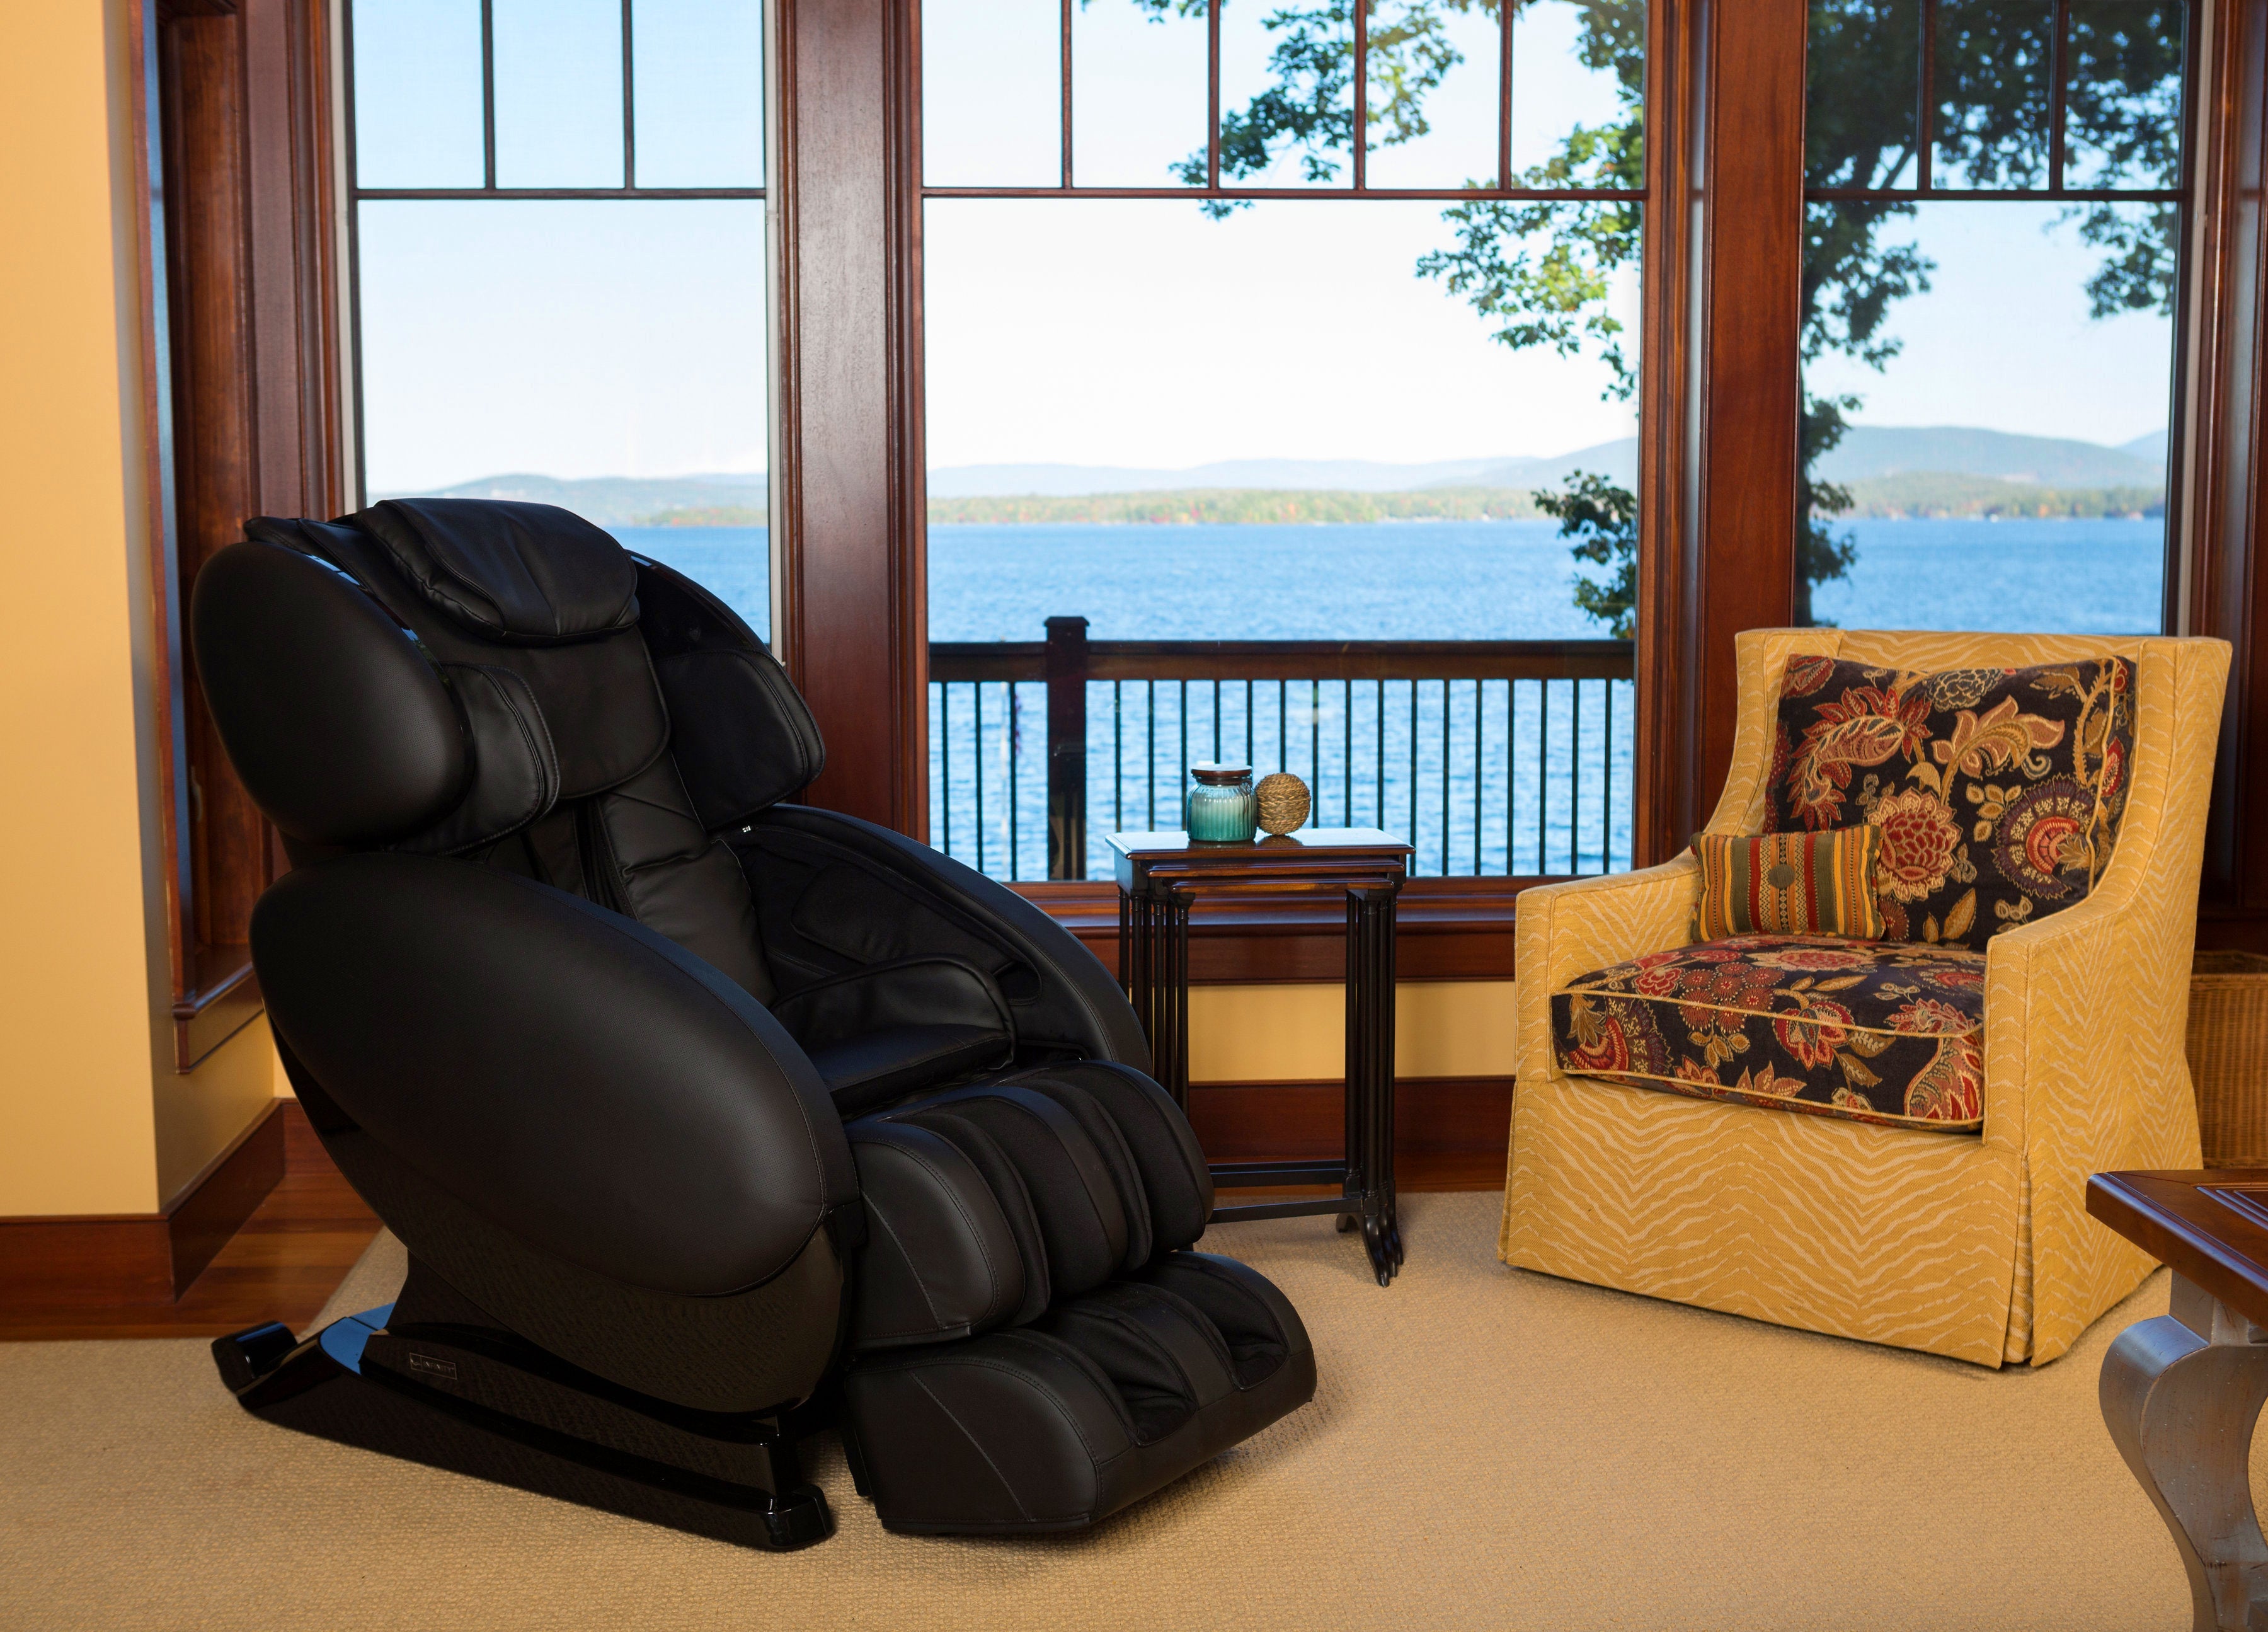 Infinity IT-8500 Plus Massage Chair Therapy Chairs Infinity 